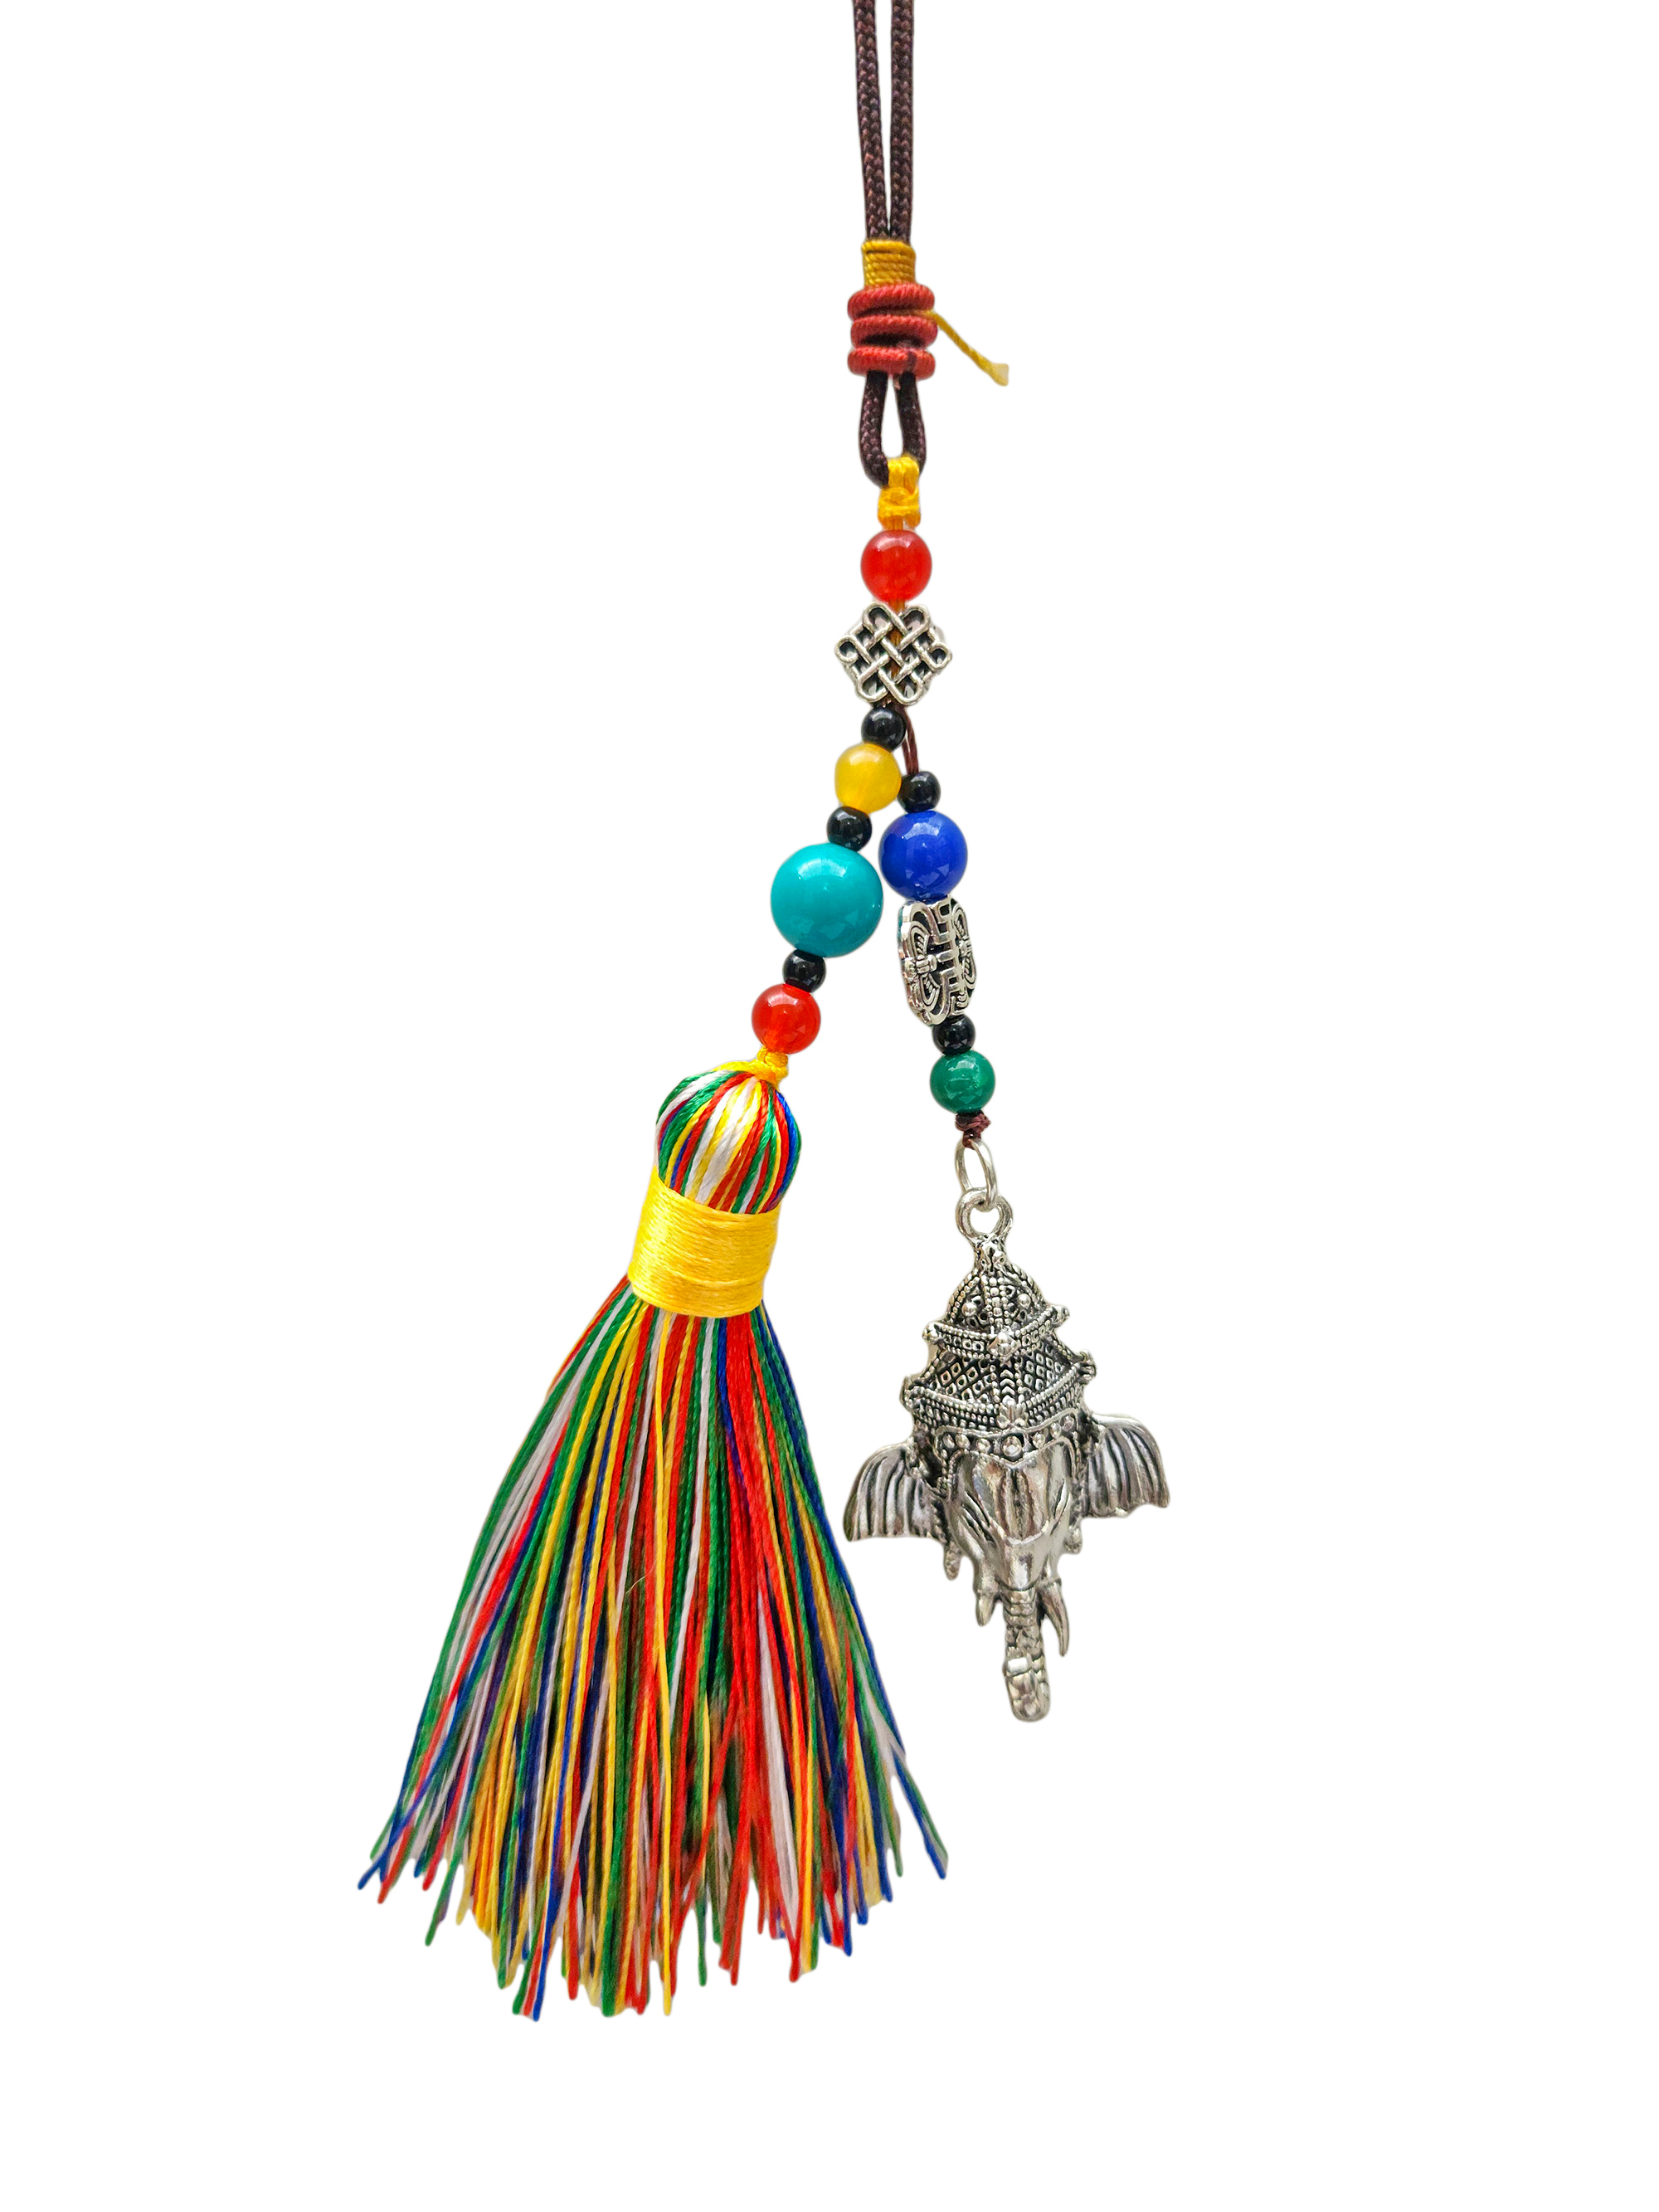 Buddhist Ritual Amulet Hanging With Ganesh, For Wall, Altar, Bags And Keyring